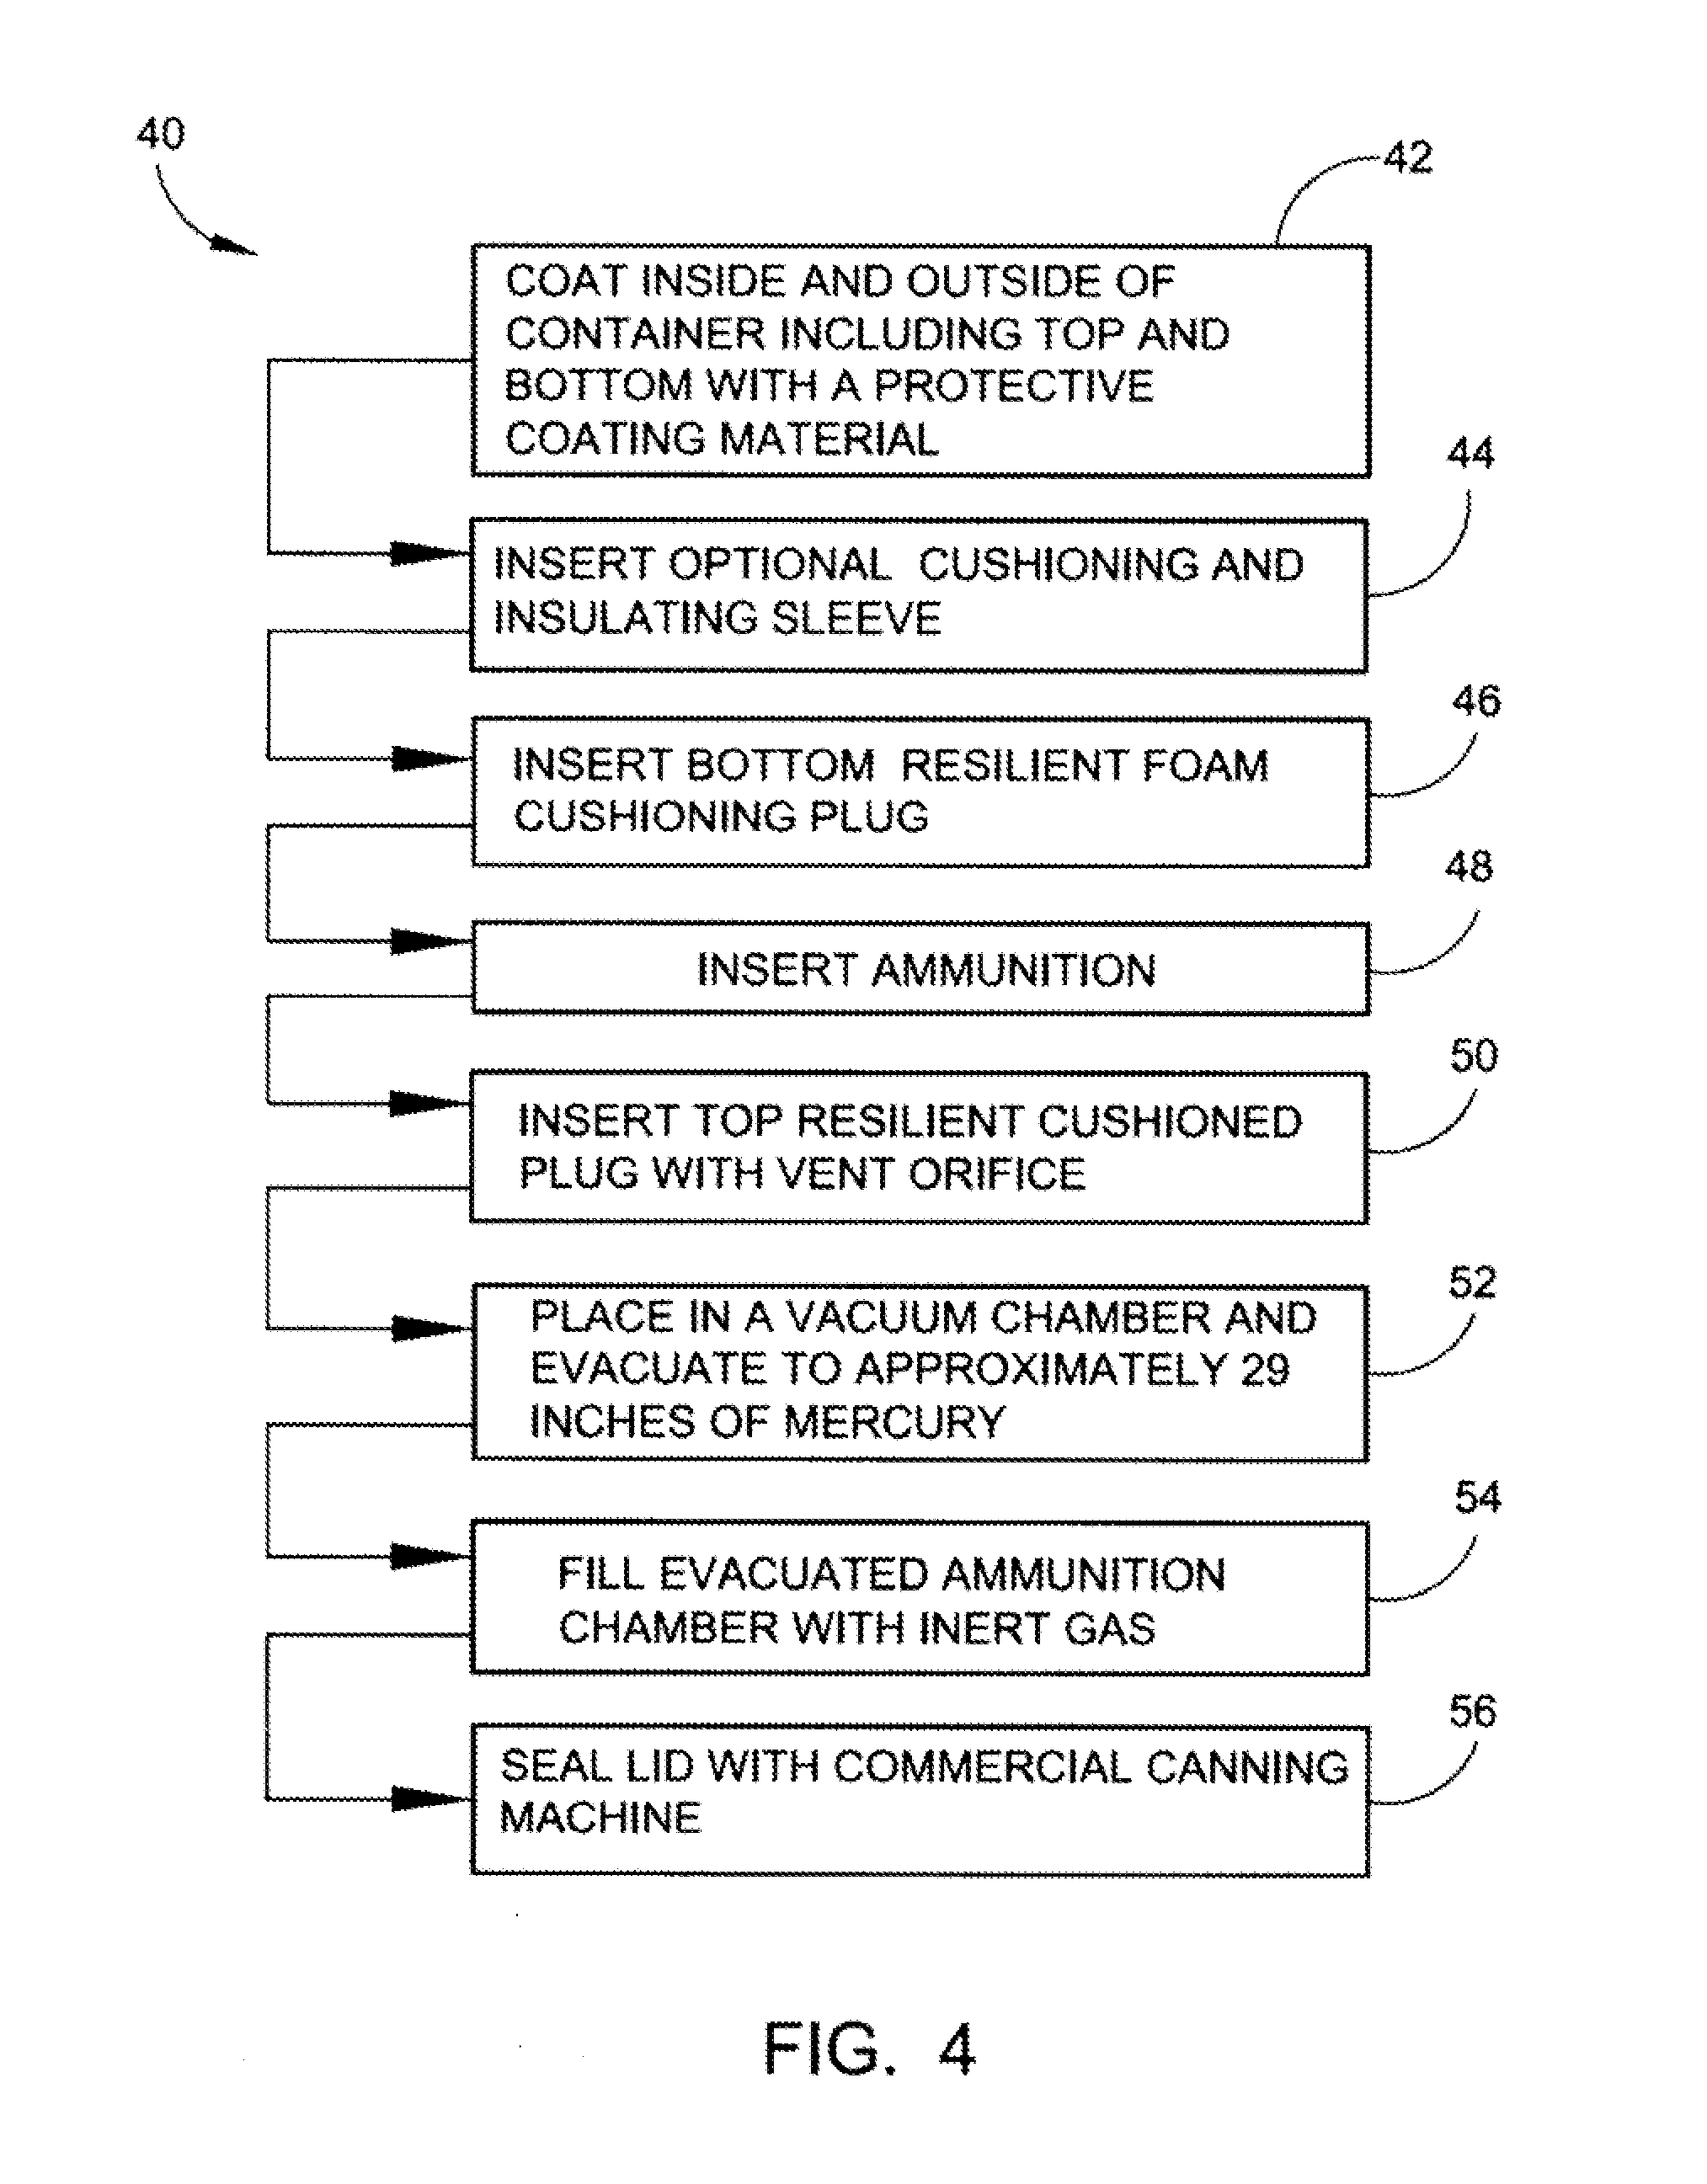 Ammunition preservation packaging and storage system